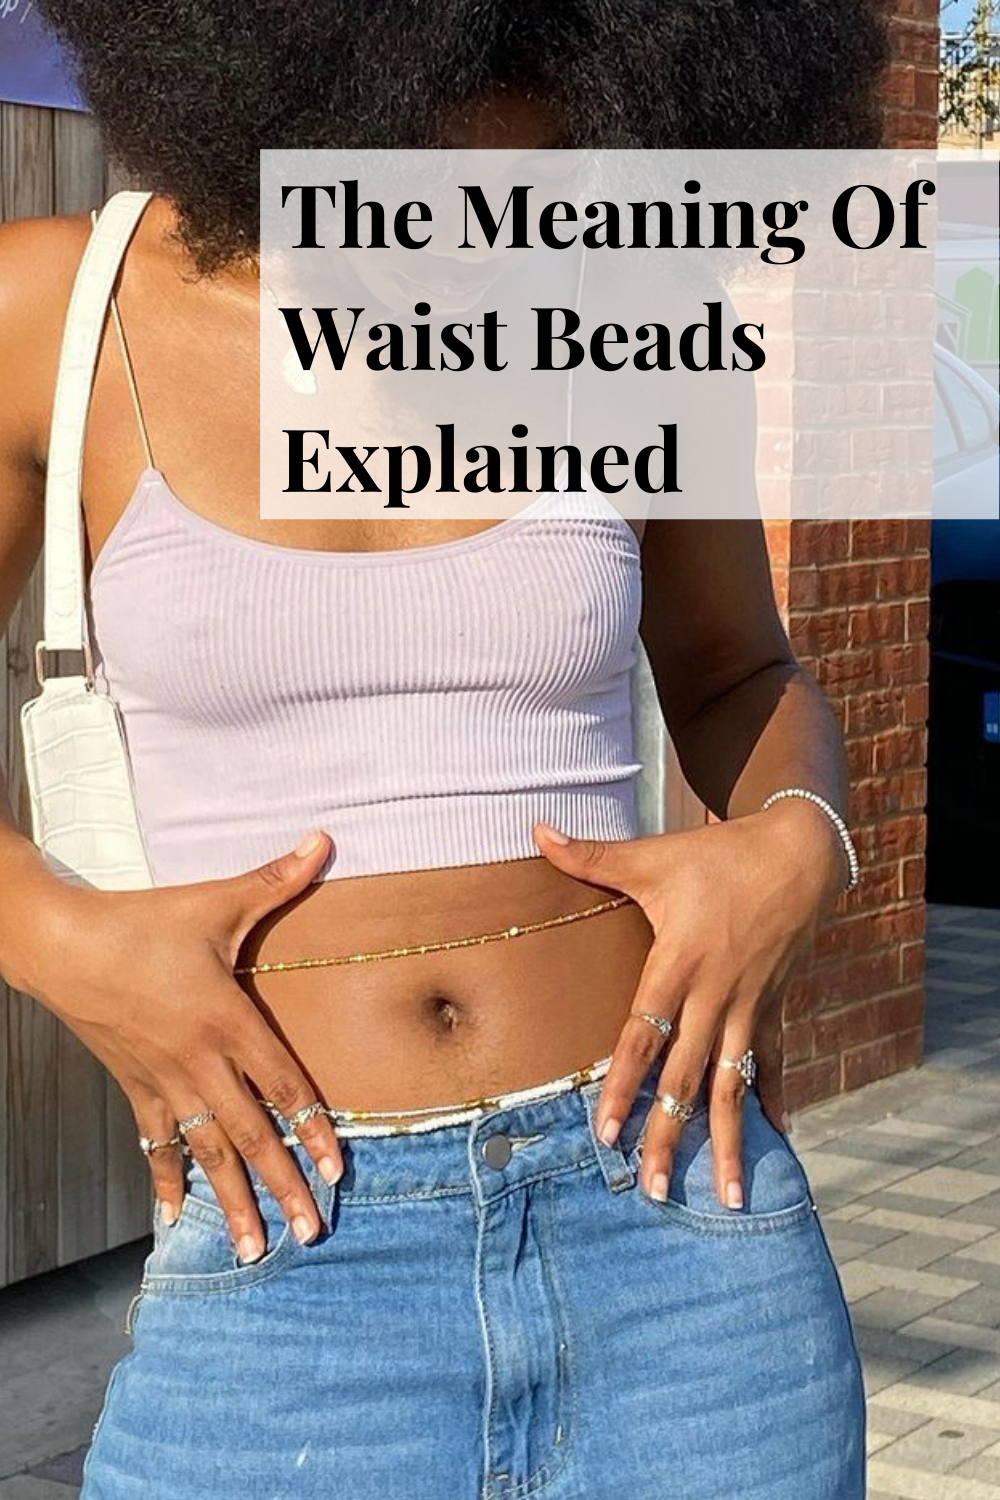 The Meaning Of Waist Beads Explained